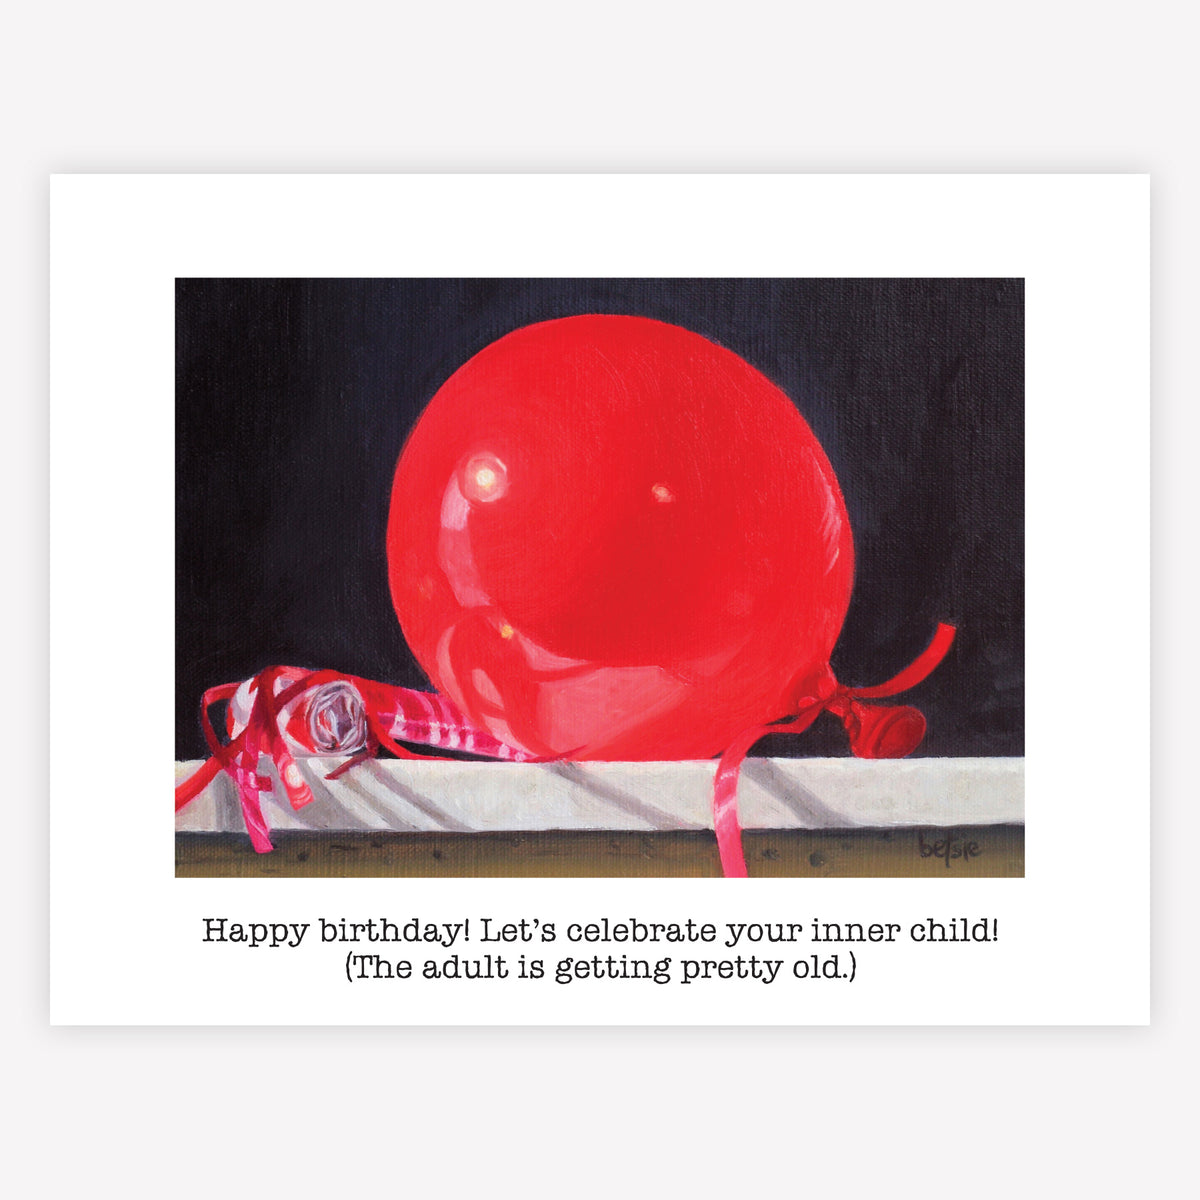 "Happy birthday! Let's celebrate your inner child" Greeting Card